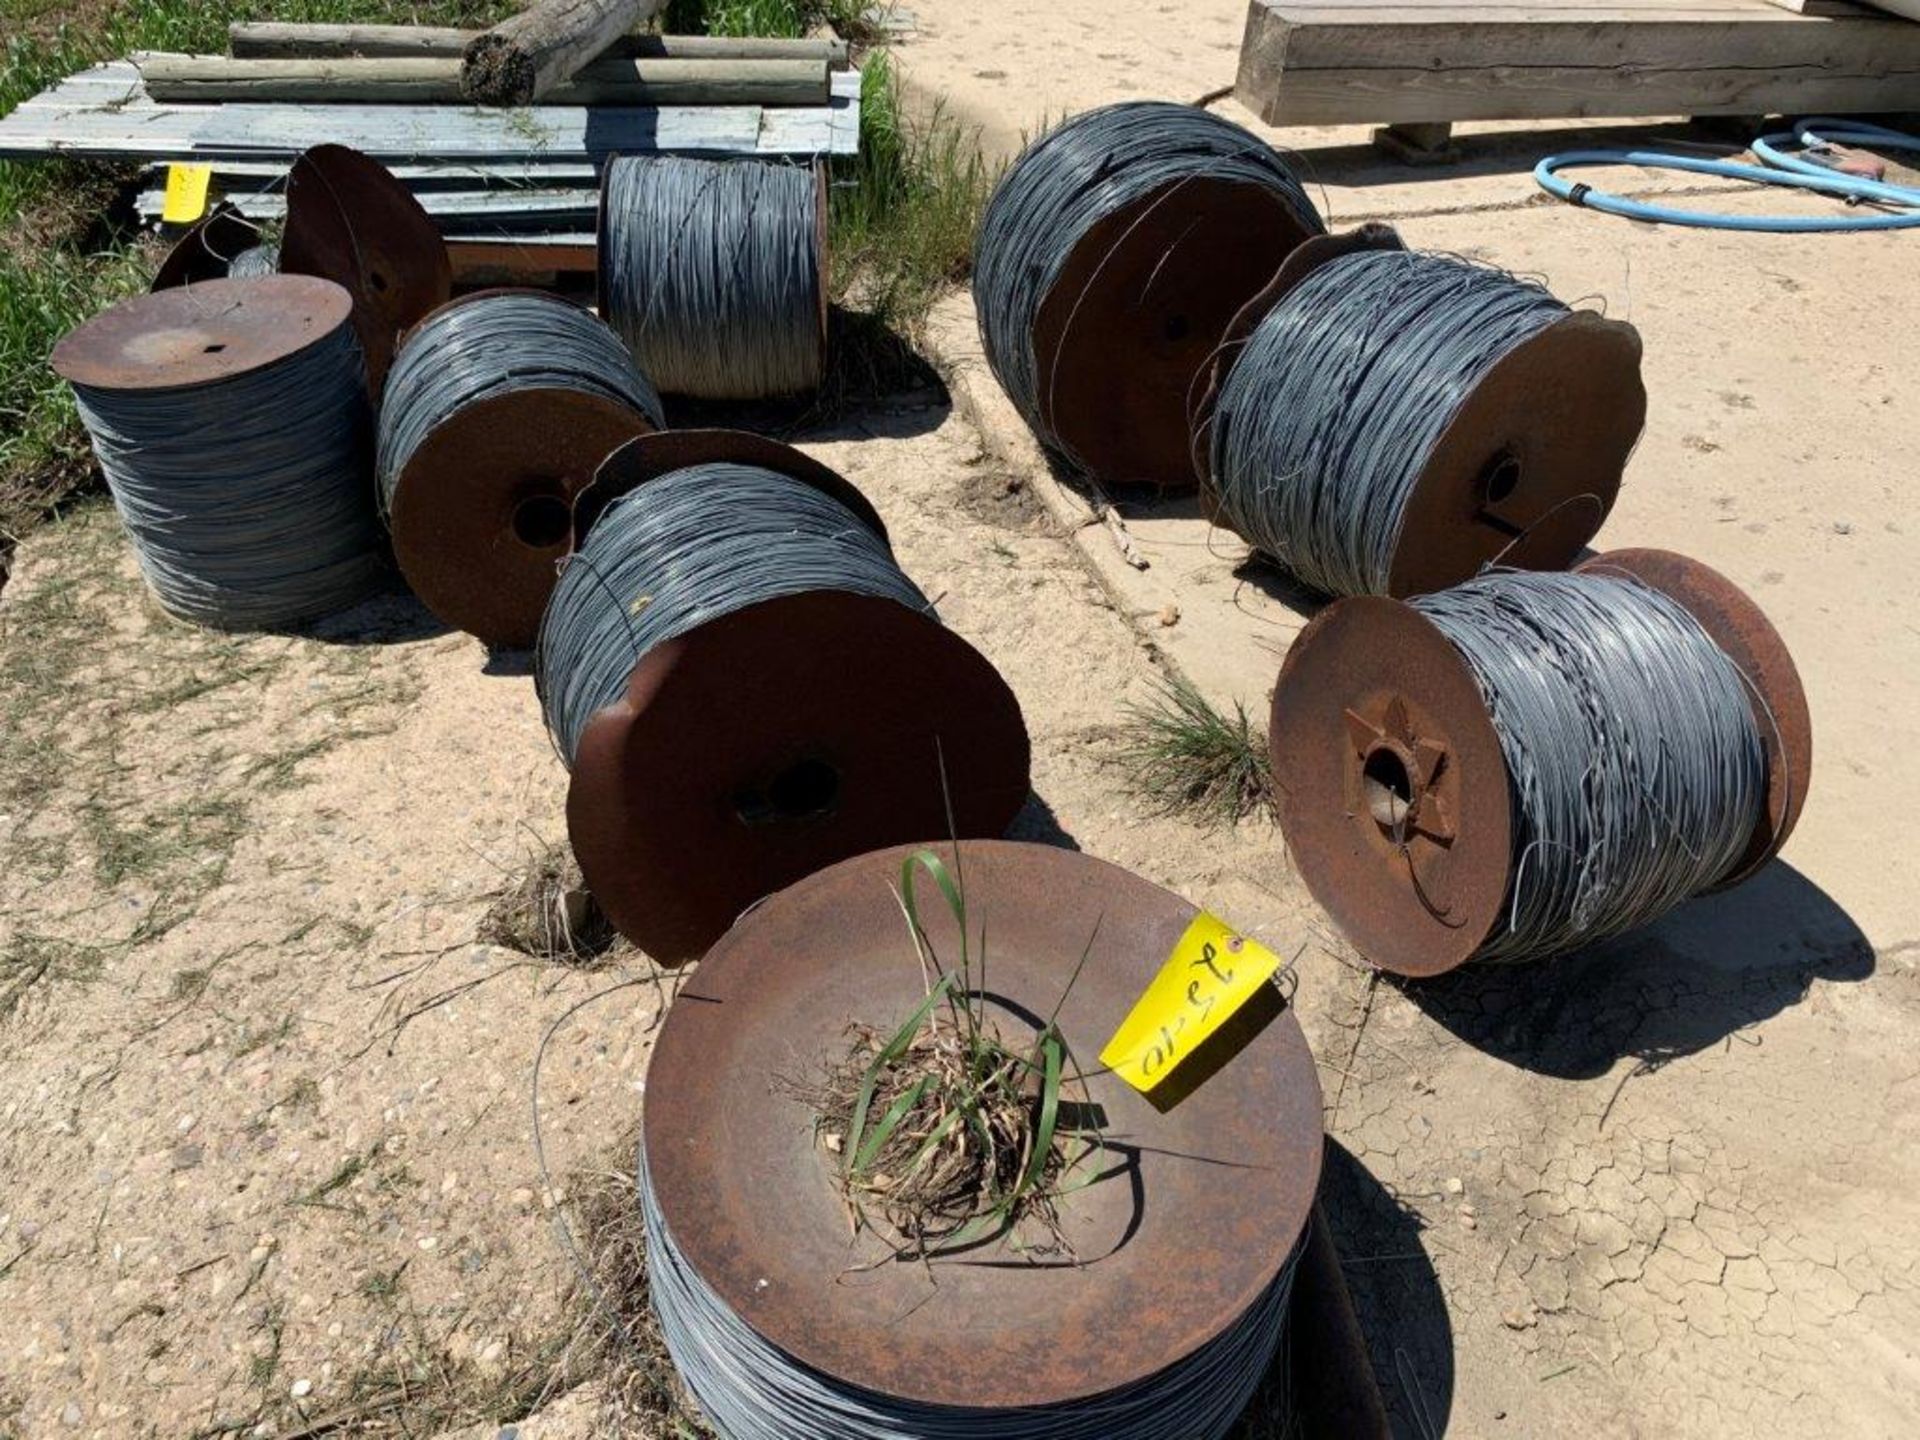 25-10 10-ROLLS OF SMOOTH HI-TENSILE WIRE (USED) - LOCATED AT VAN STRYLAND FARMS CLIVE CALL CRAIG